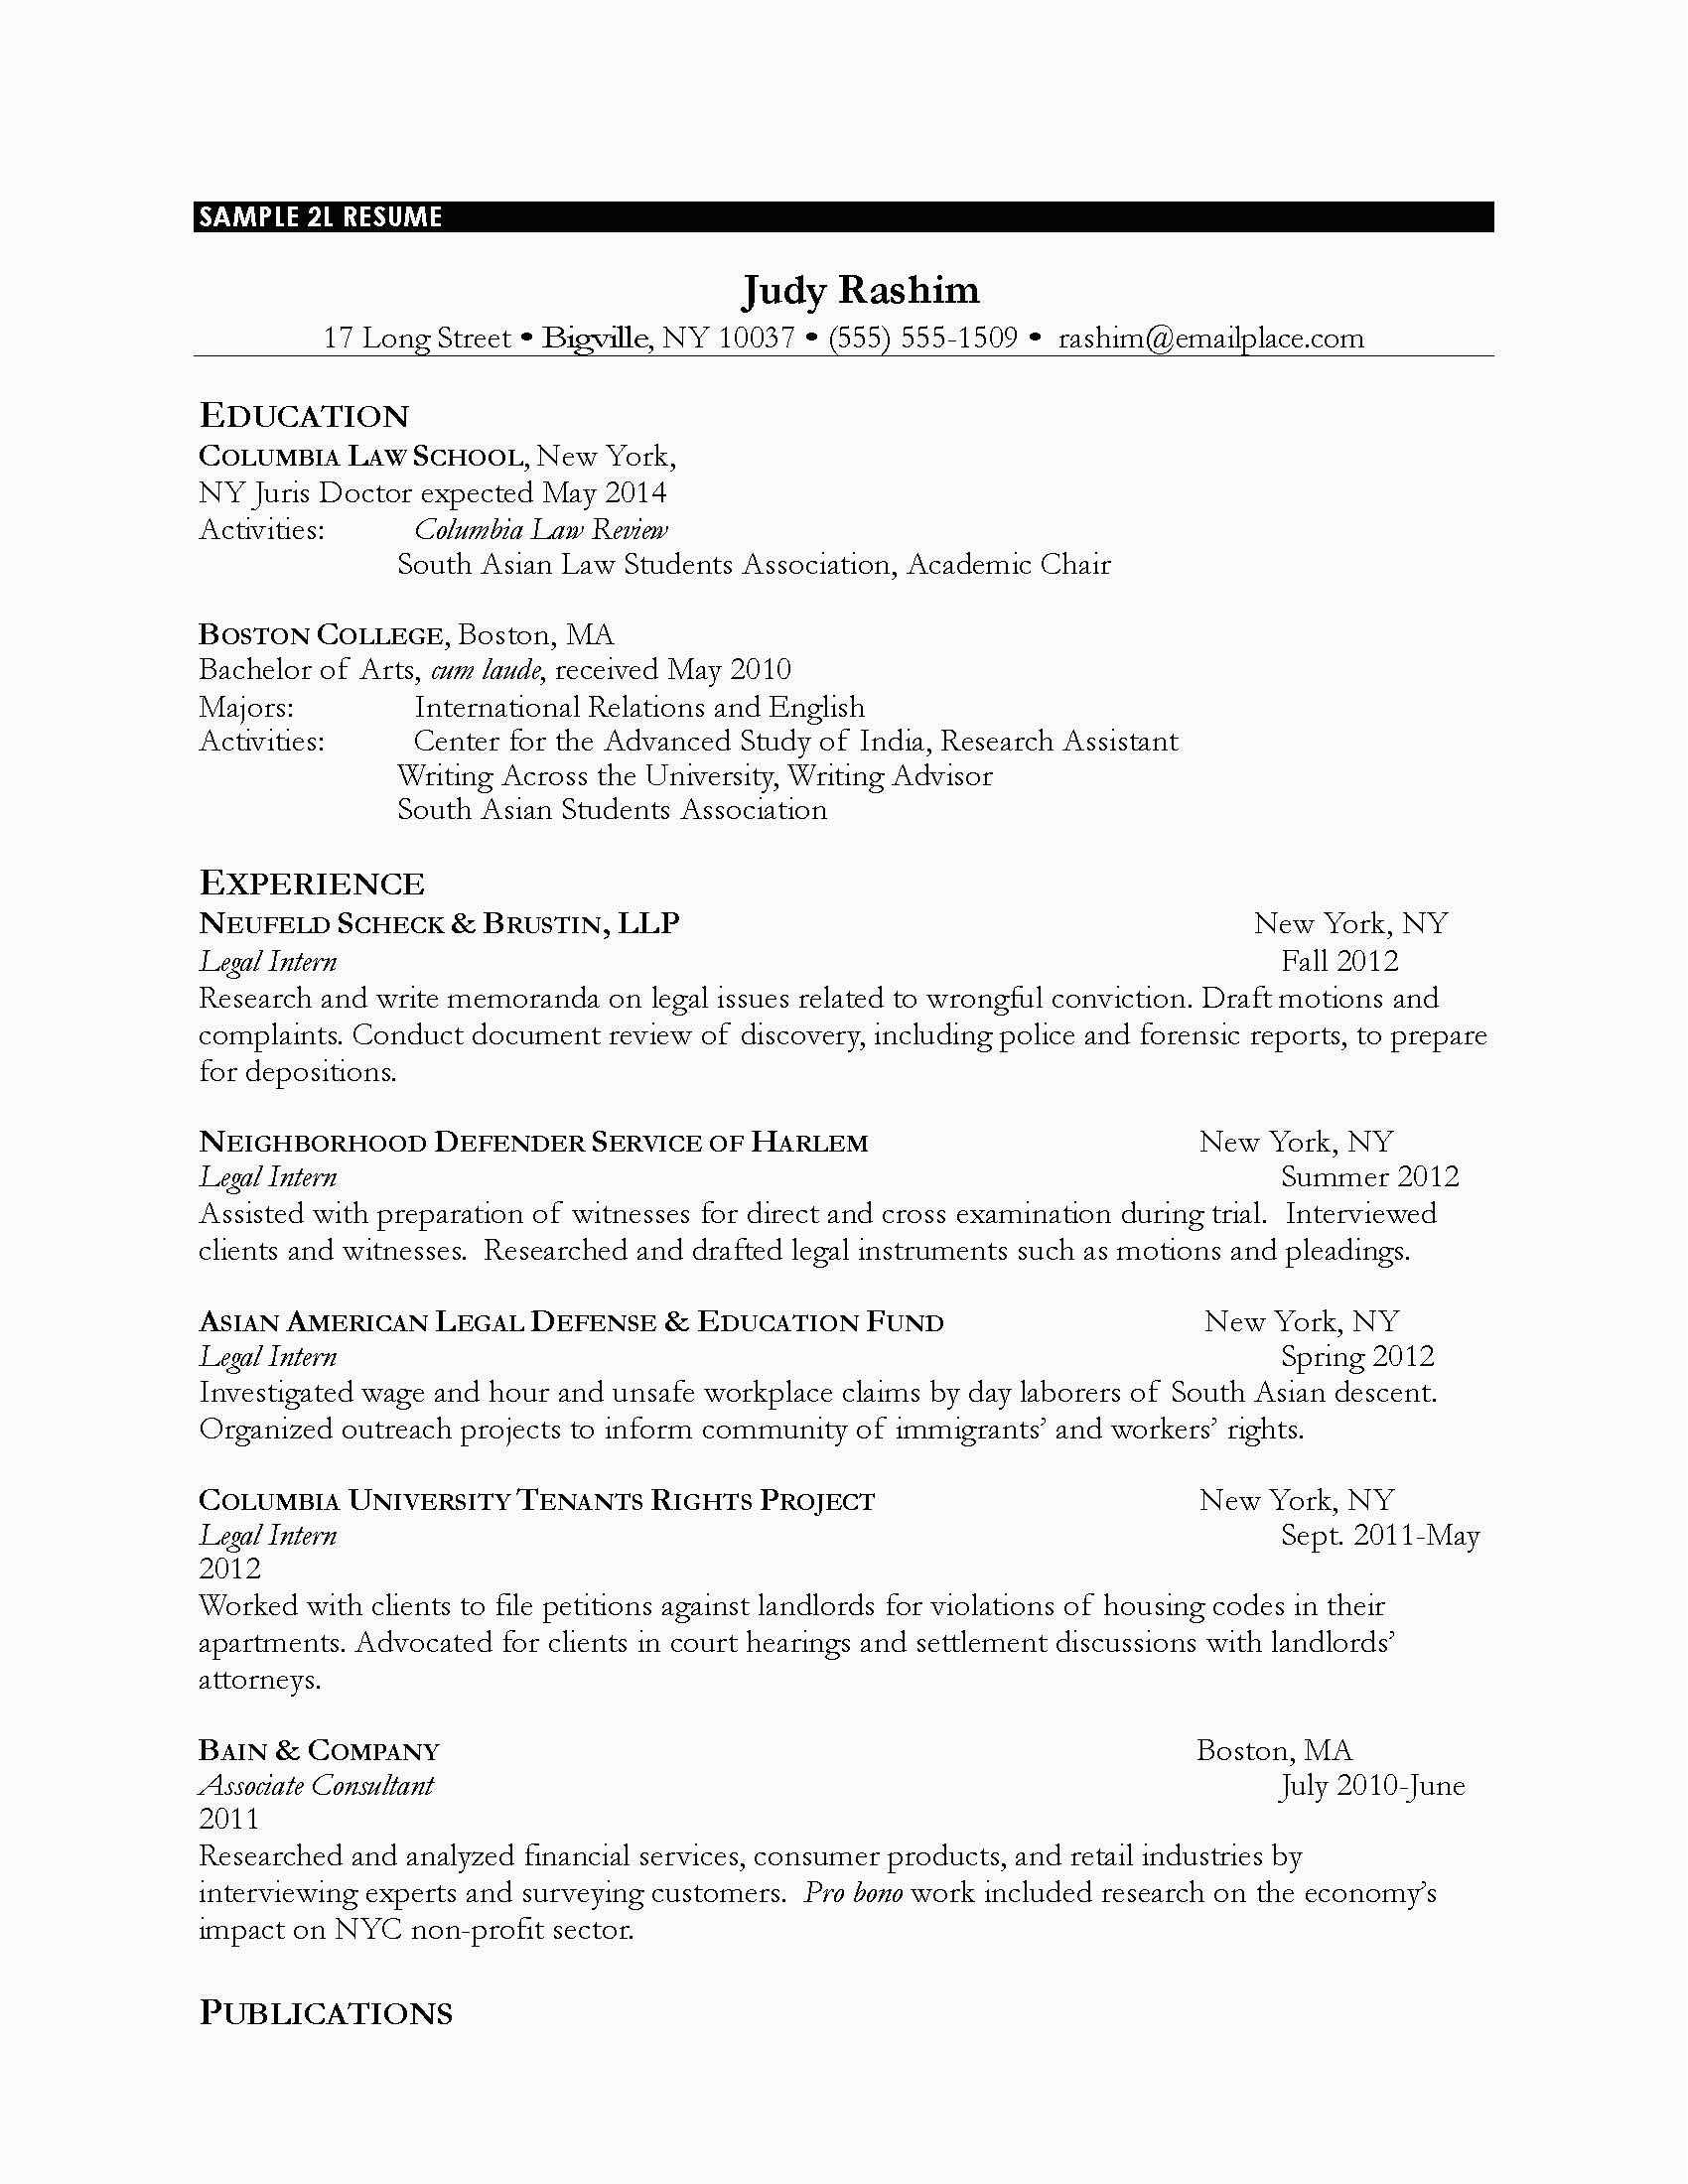 Legal Resume Samples for Law Students Resume format Resume format for Law Students